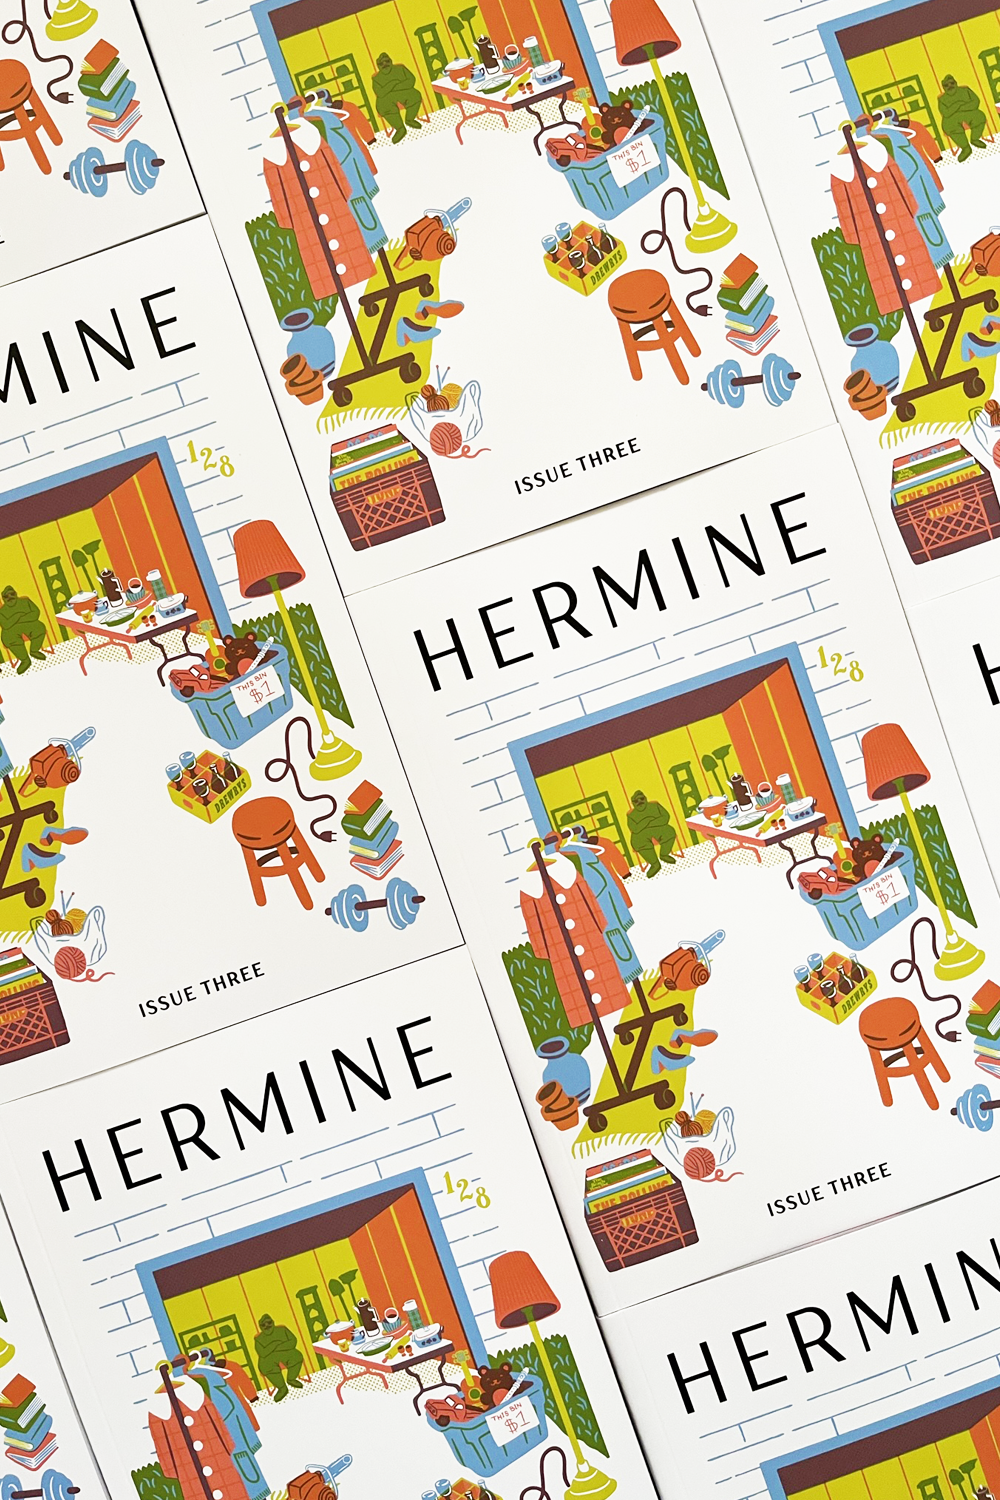 Hermine Issue Three, cover by Kristin McPherson